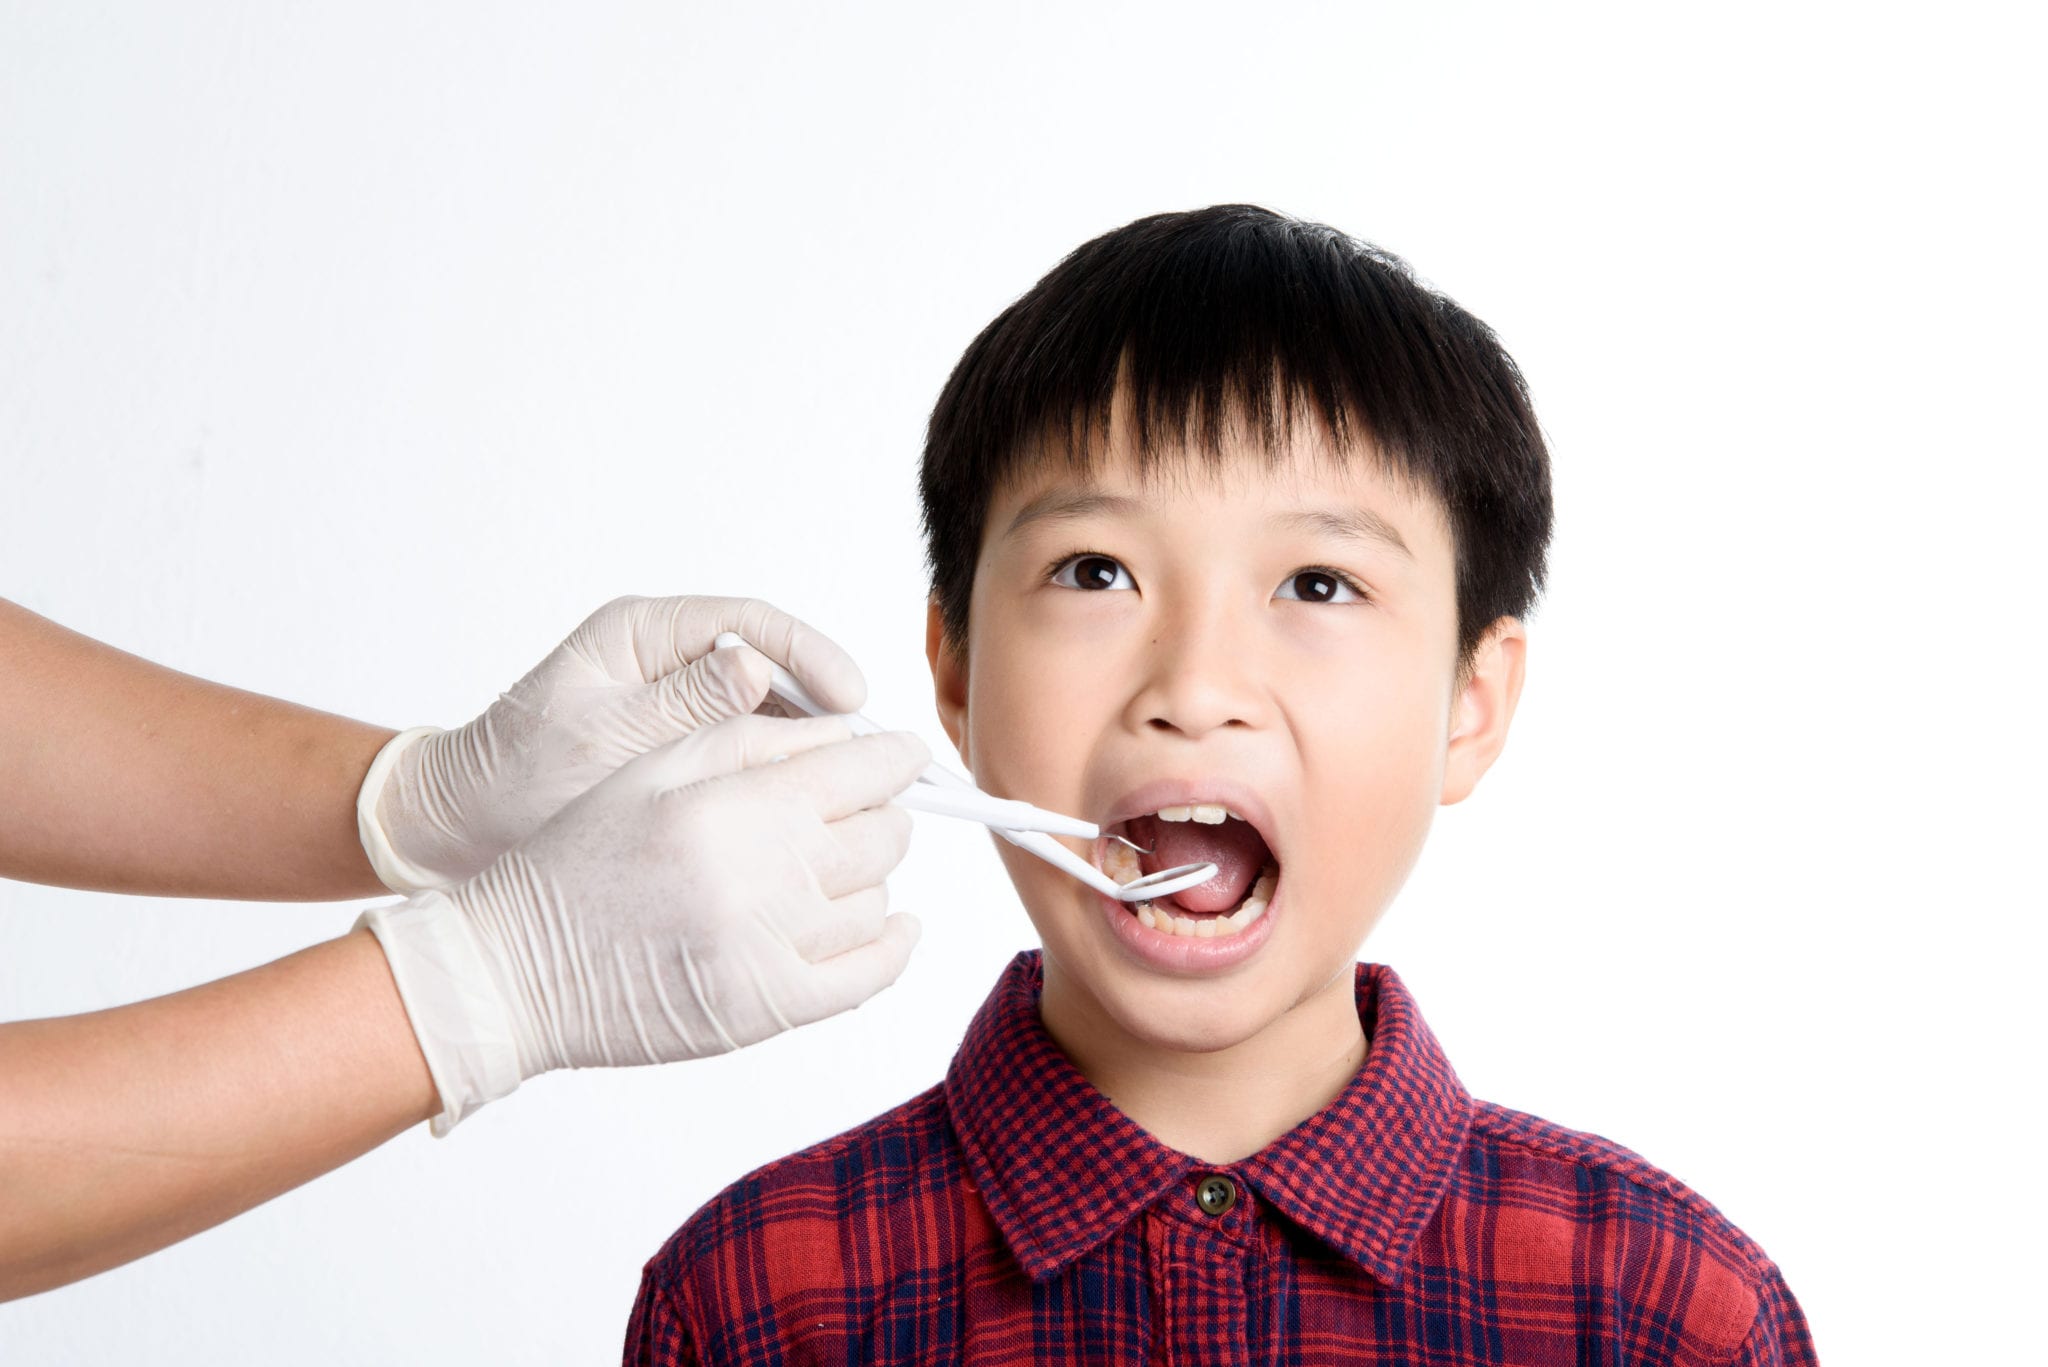 A Dentist inspecting the sealants on the child